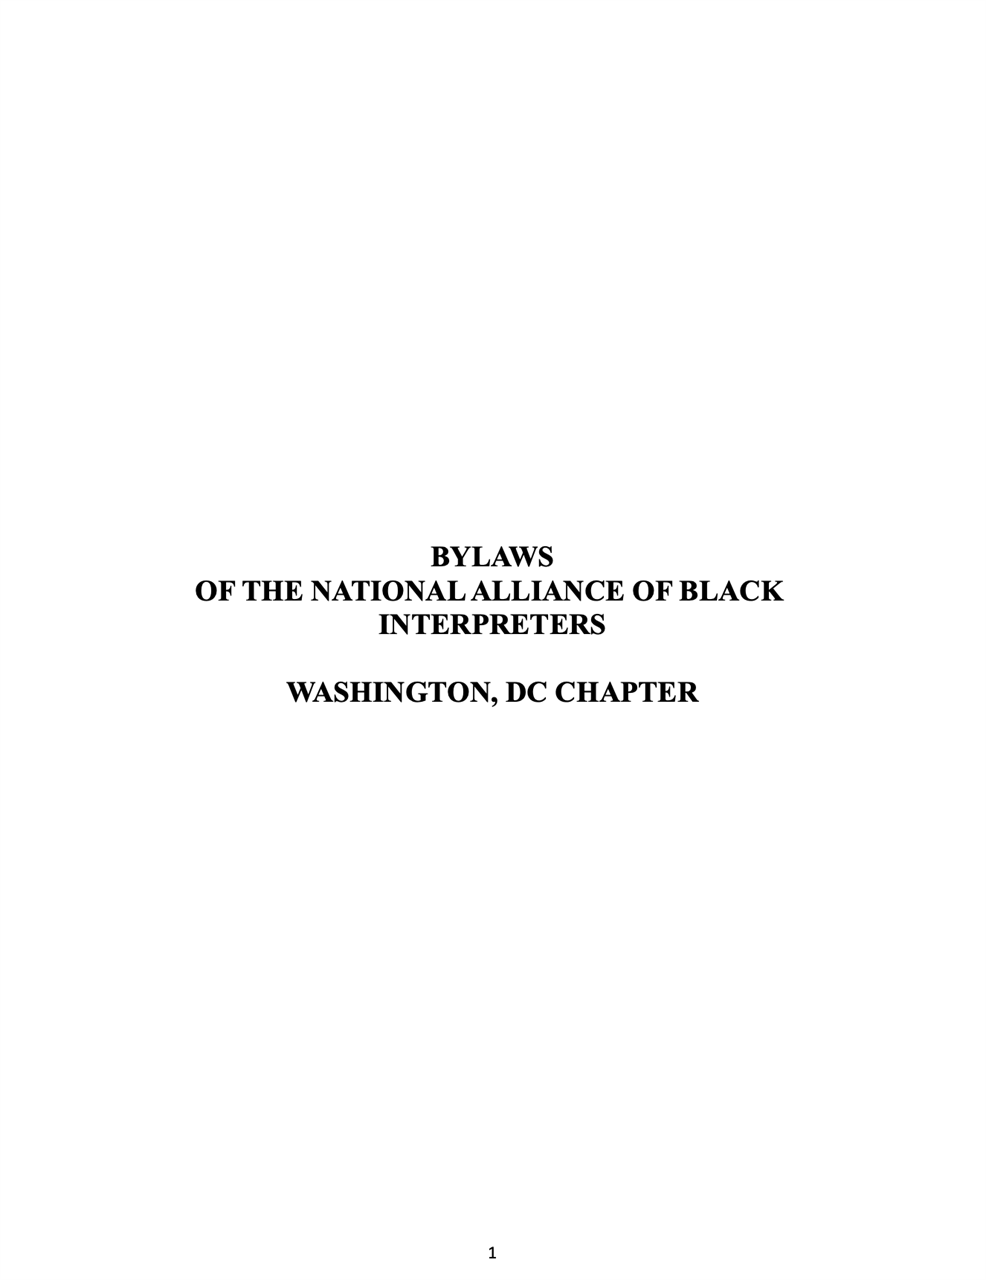 Screenshot of an 8x11 white document with black text that reads, “Bylaws of the National Alliance of Black Interpreters- Washington, DC Chapter.”